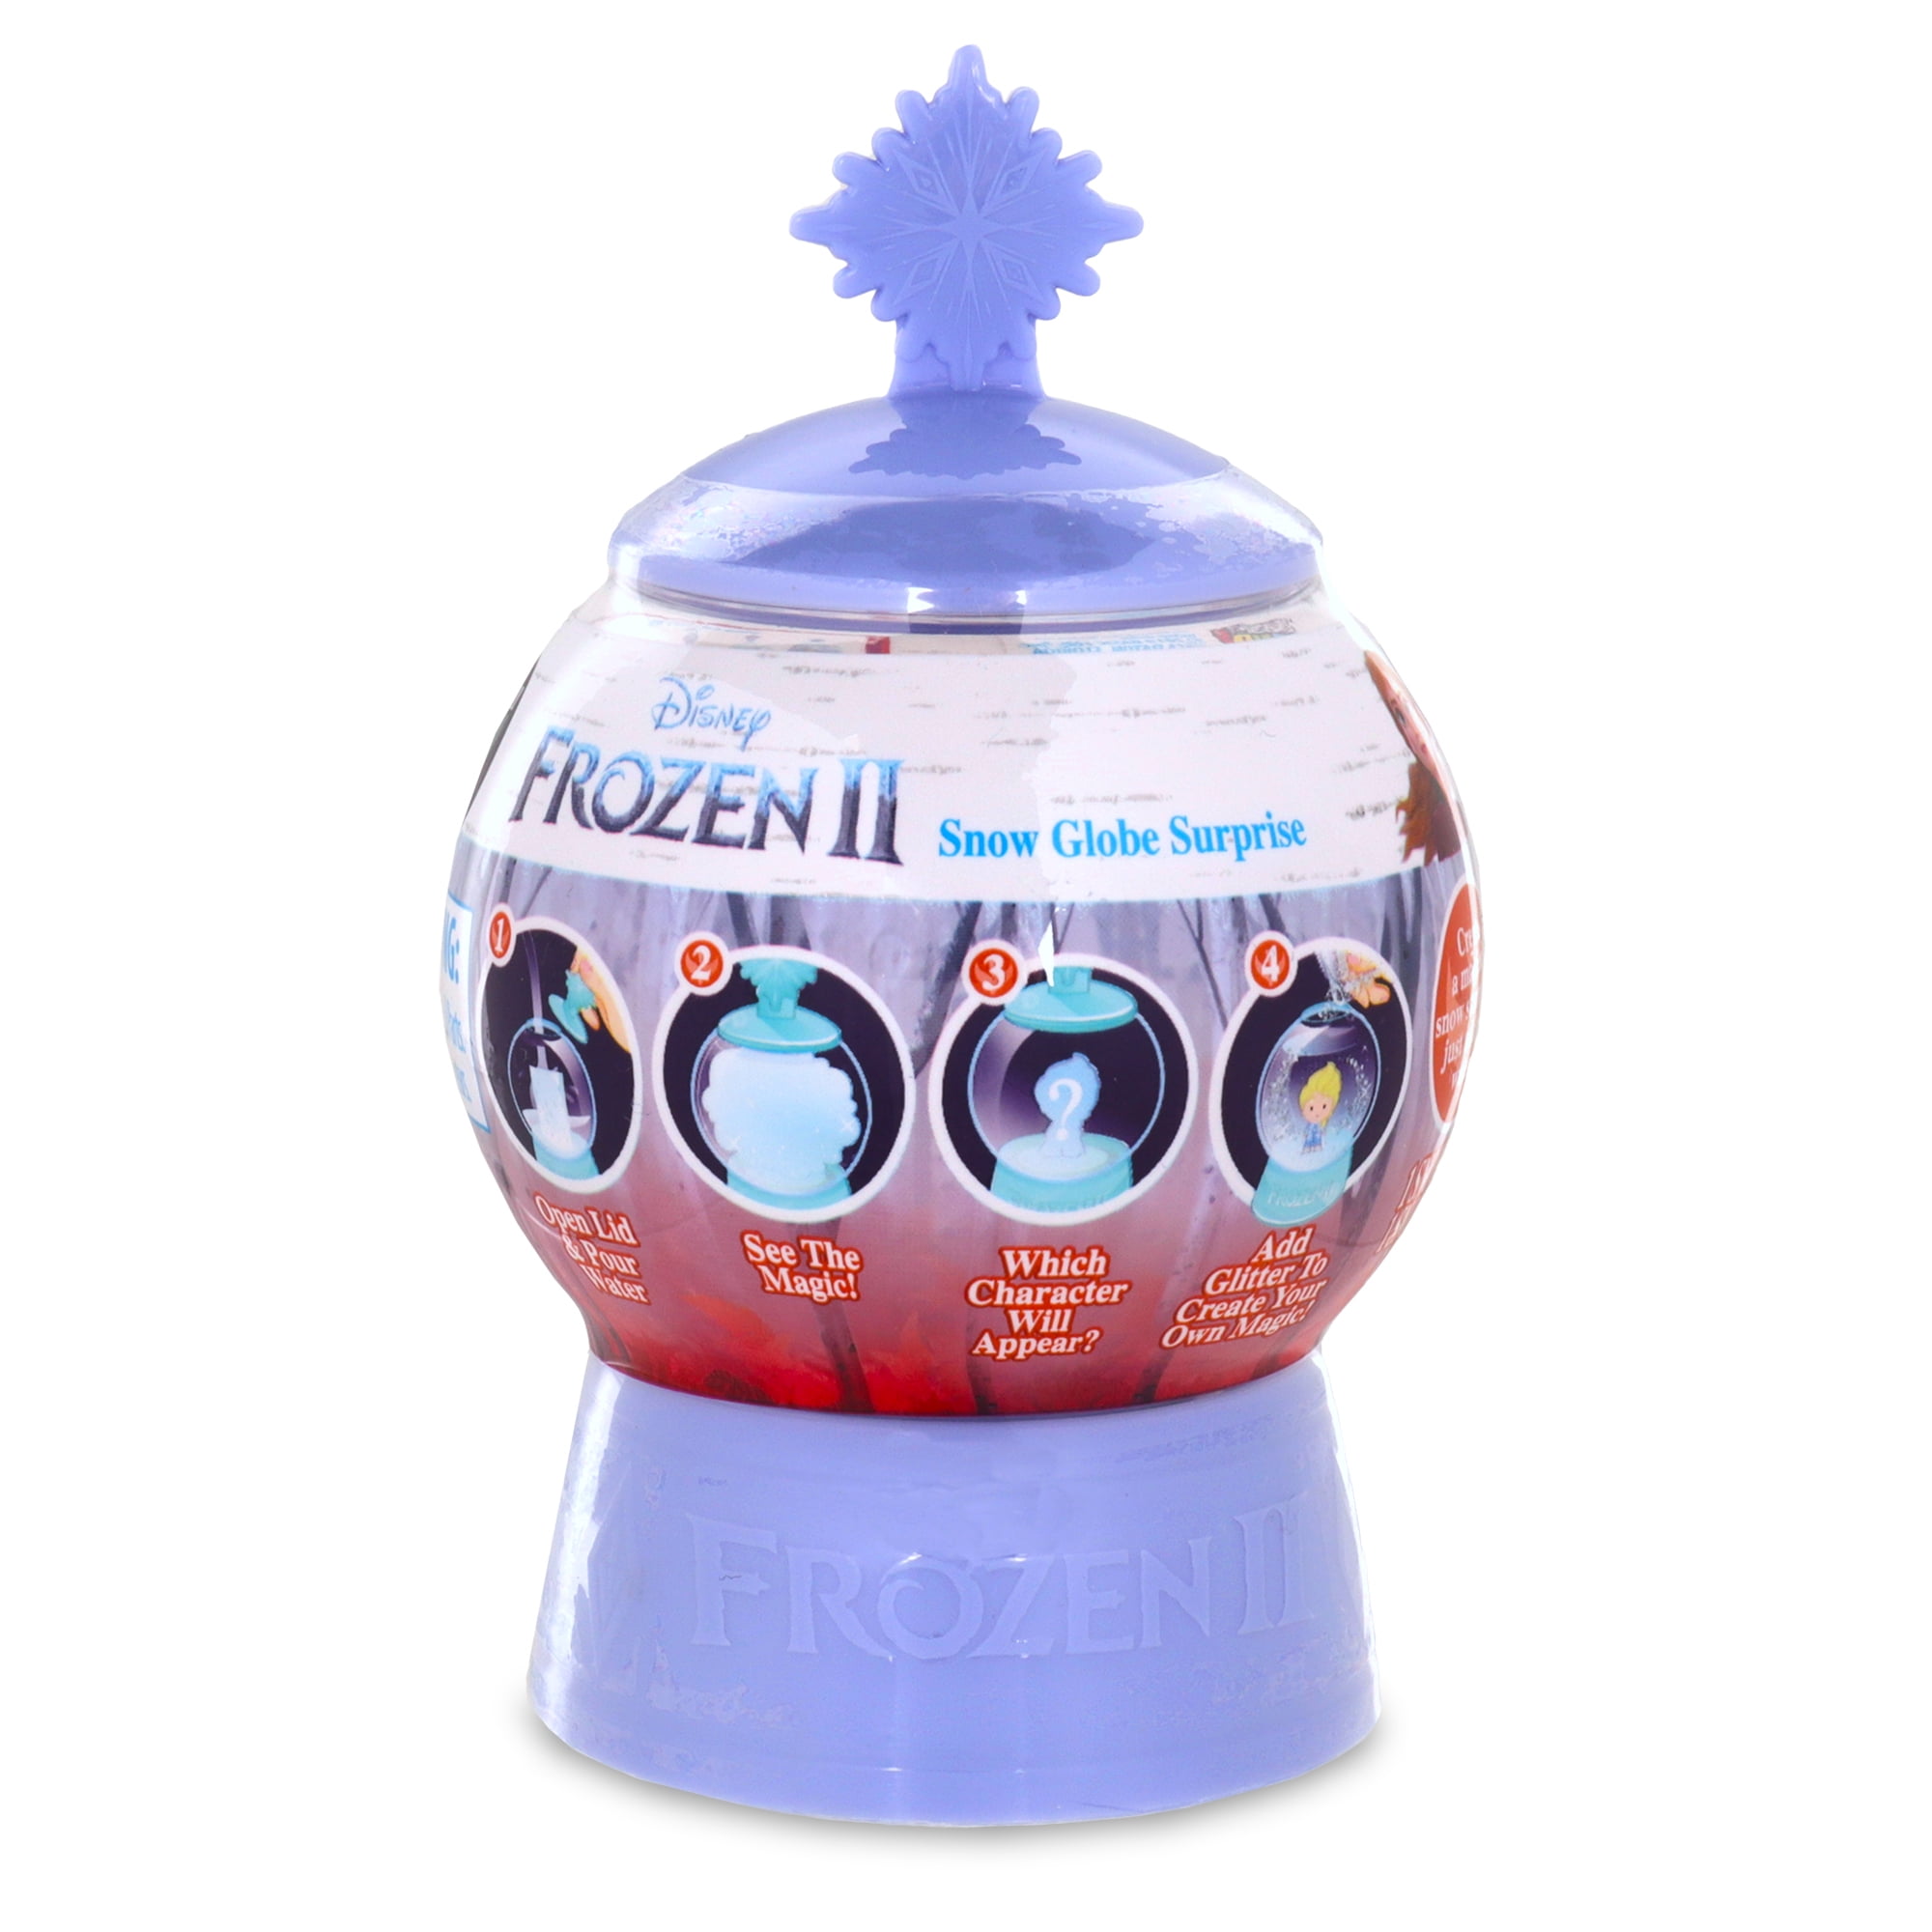 Frozen 2 Snow Globe Surprise Single - Magical Snow Globe and Reveal Collectible Characters ? Walmart Exclusive - Walmart.com